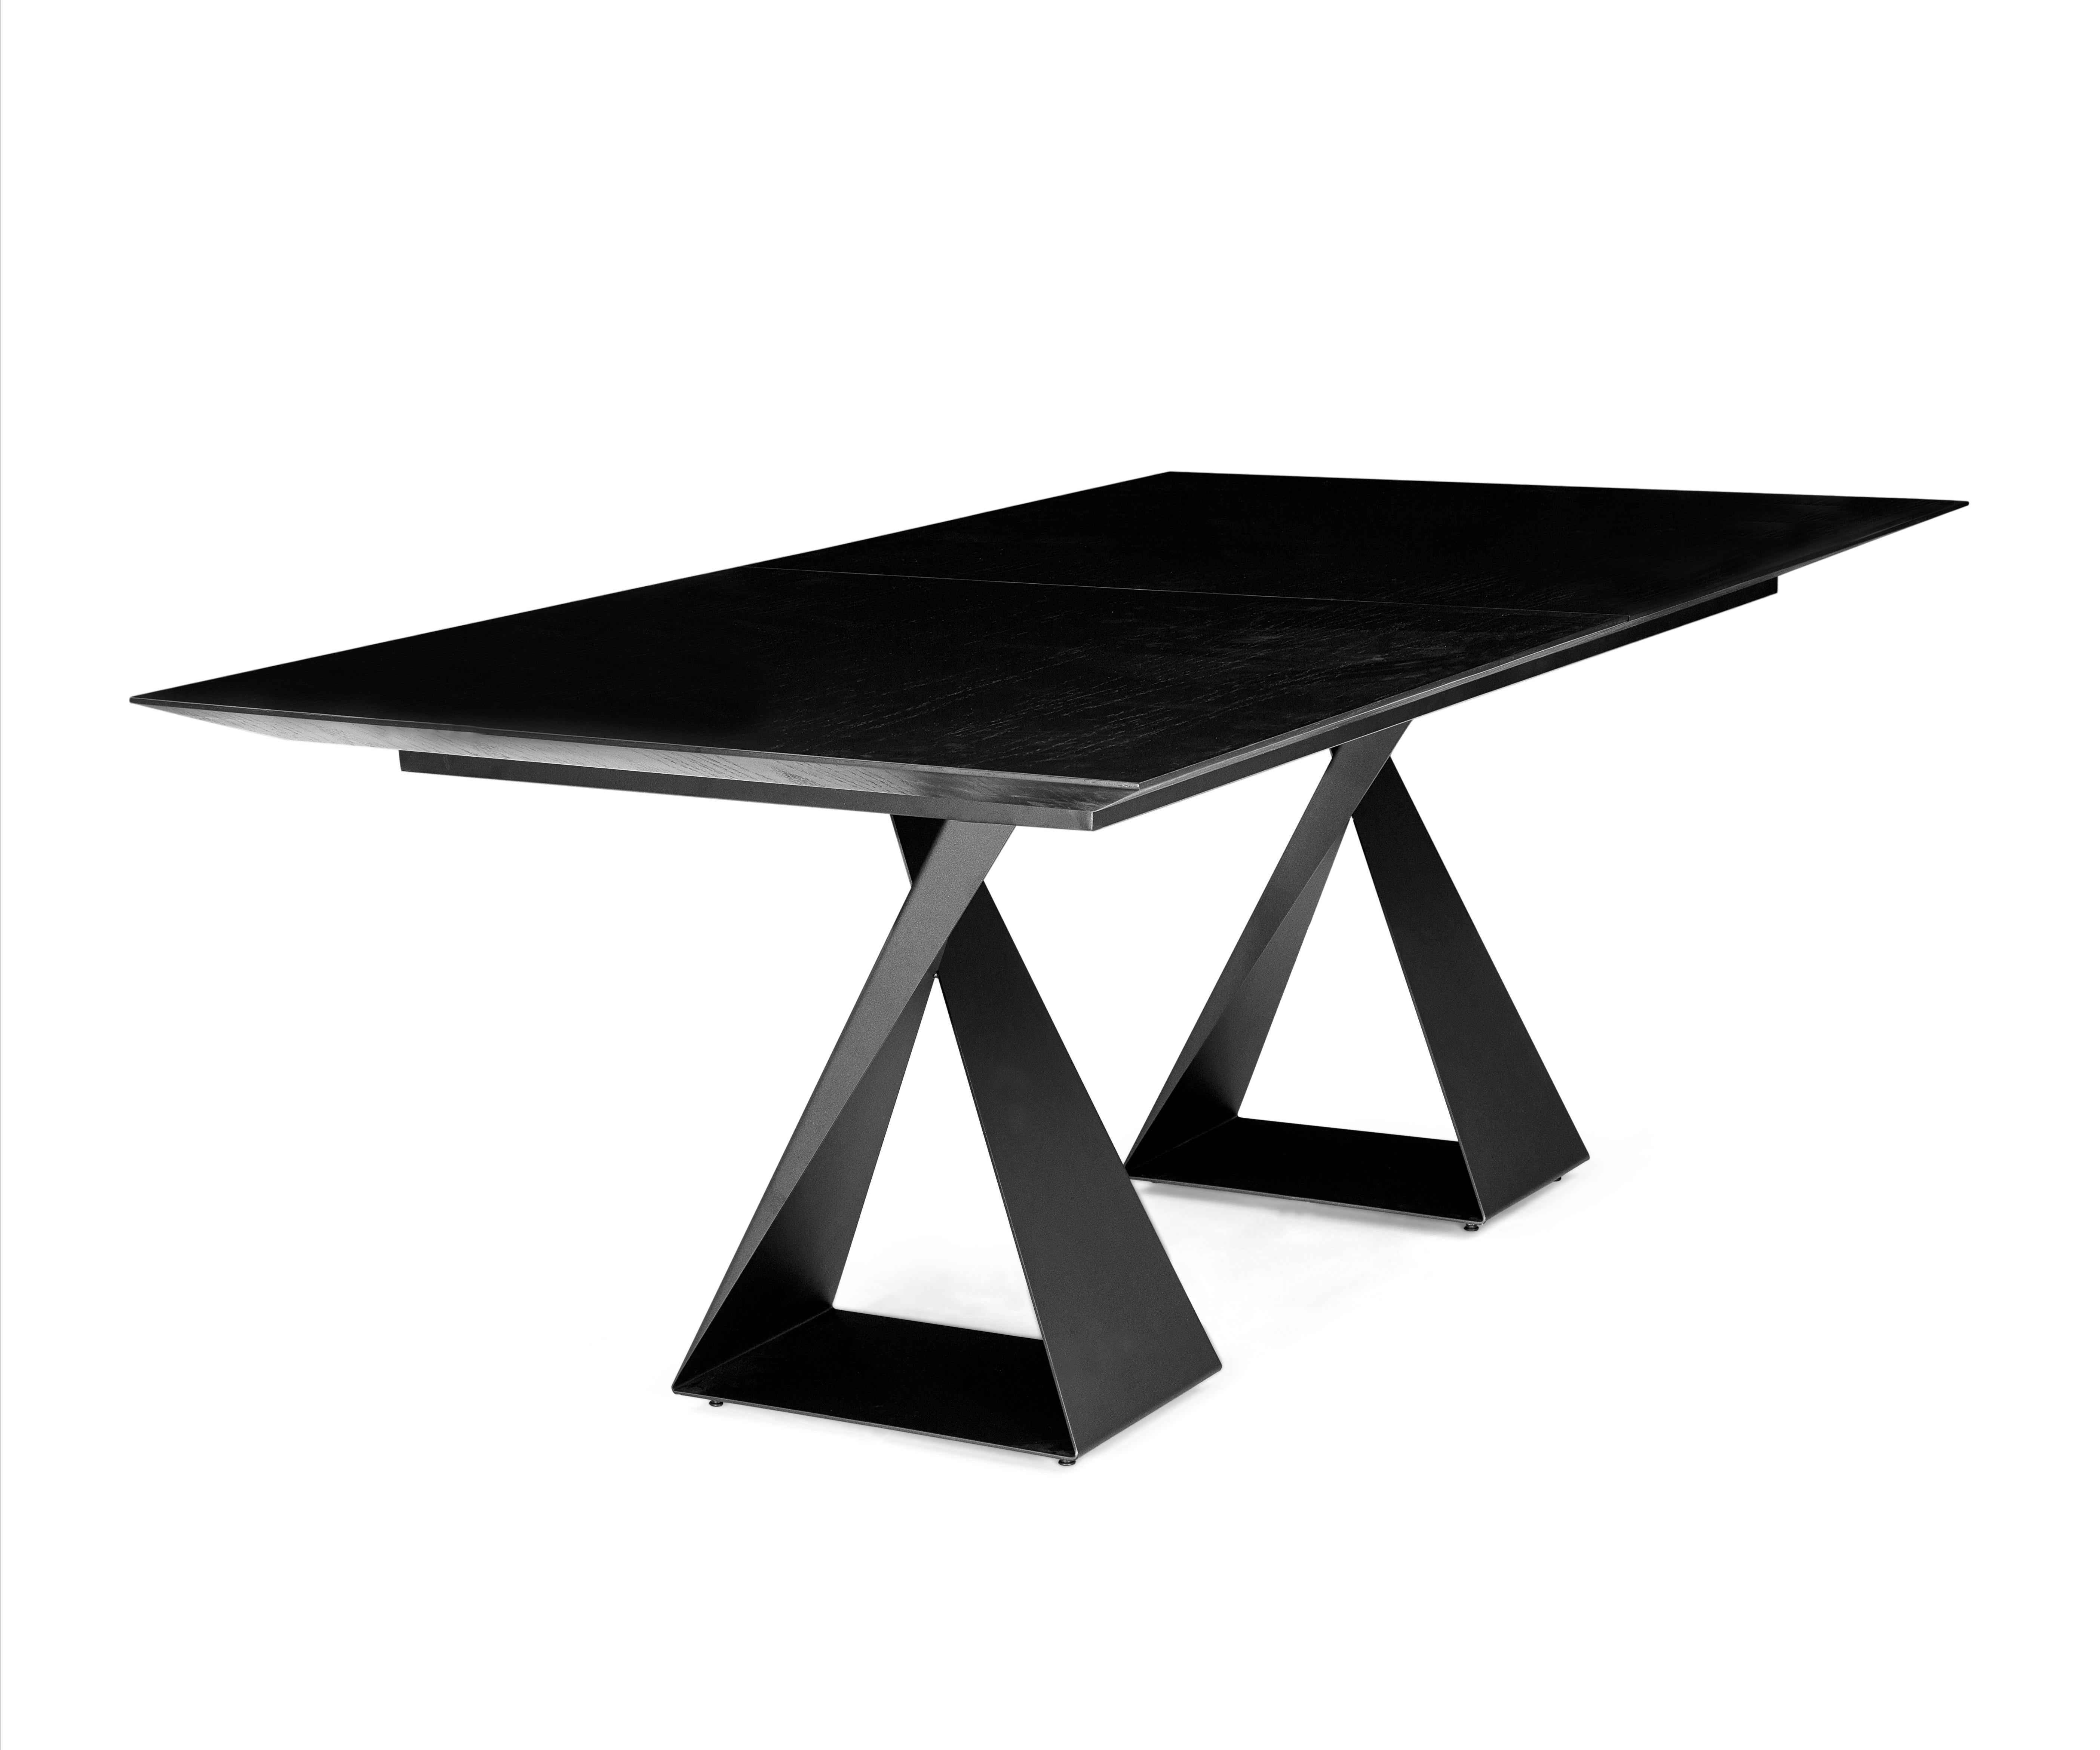 Uultis design team has manufactured the Cronos dining table in a black finish top with metal folding feet, perfect for your dreamed dining space. As remarkable and imposing as the God it is named after, the Cronos dining table has a contemporary and